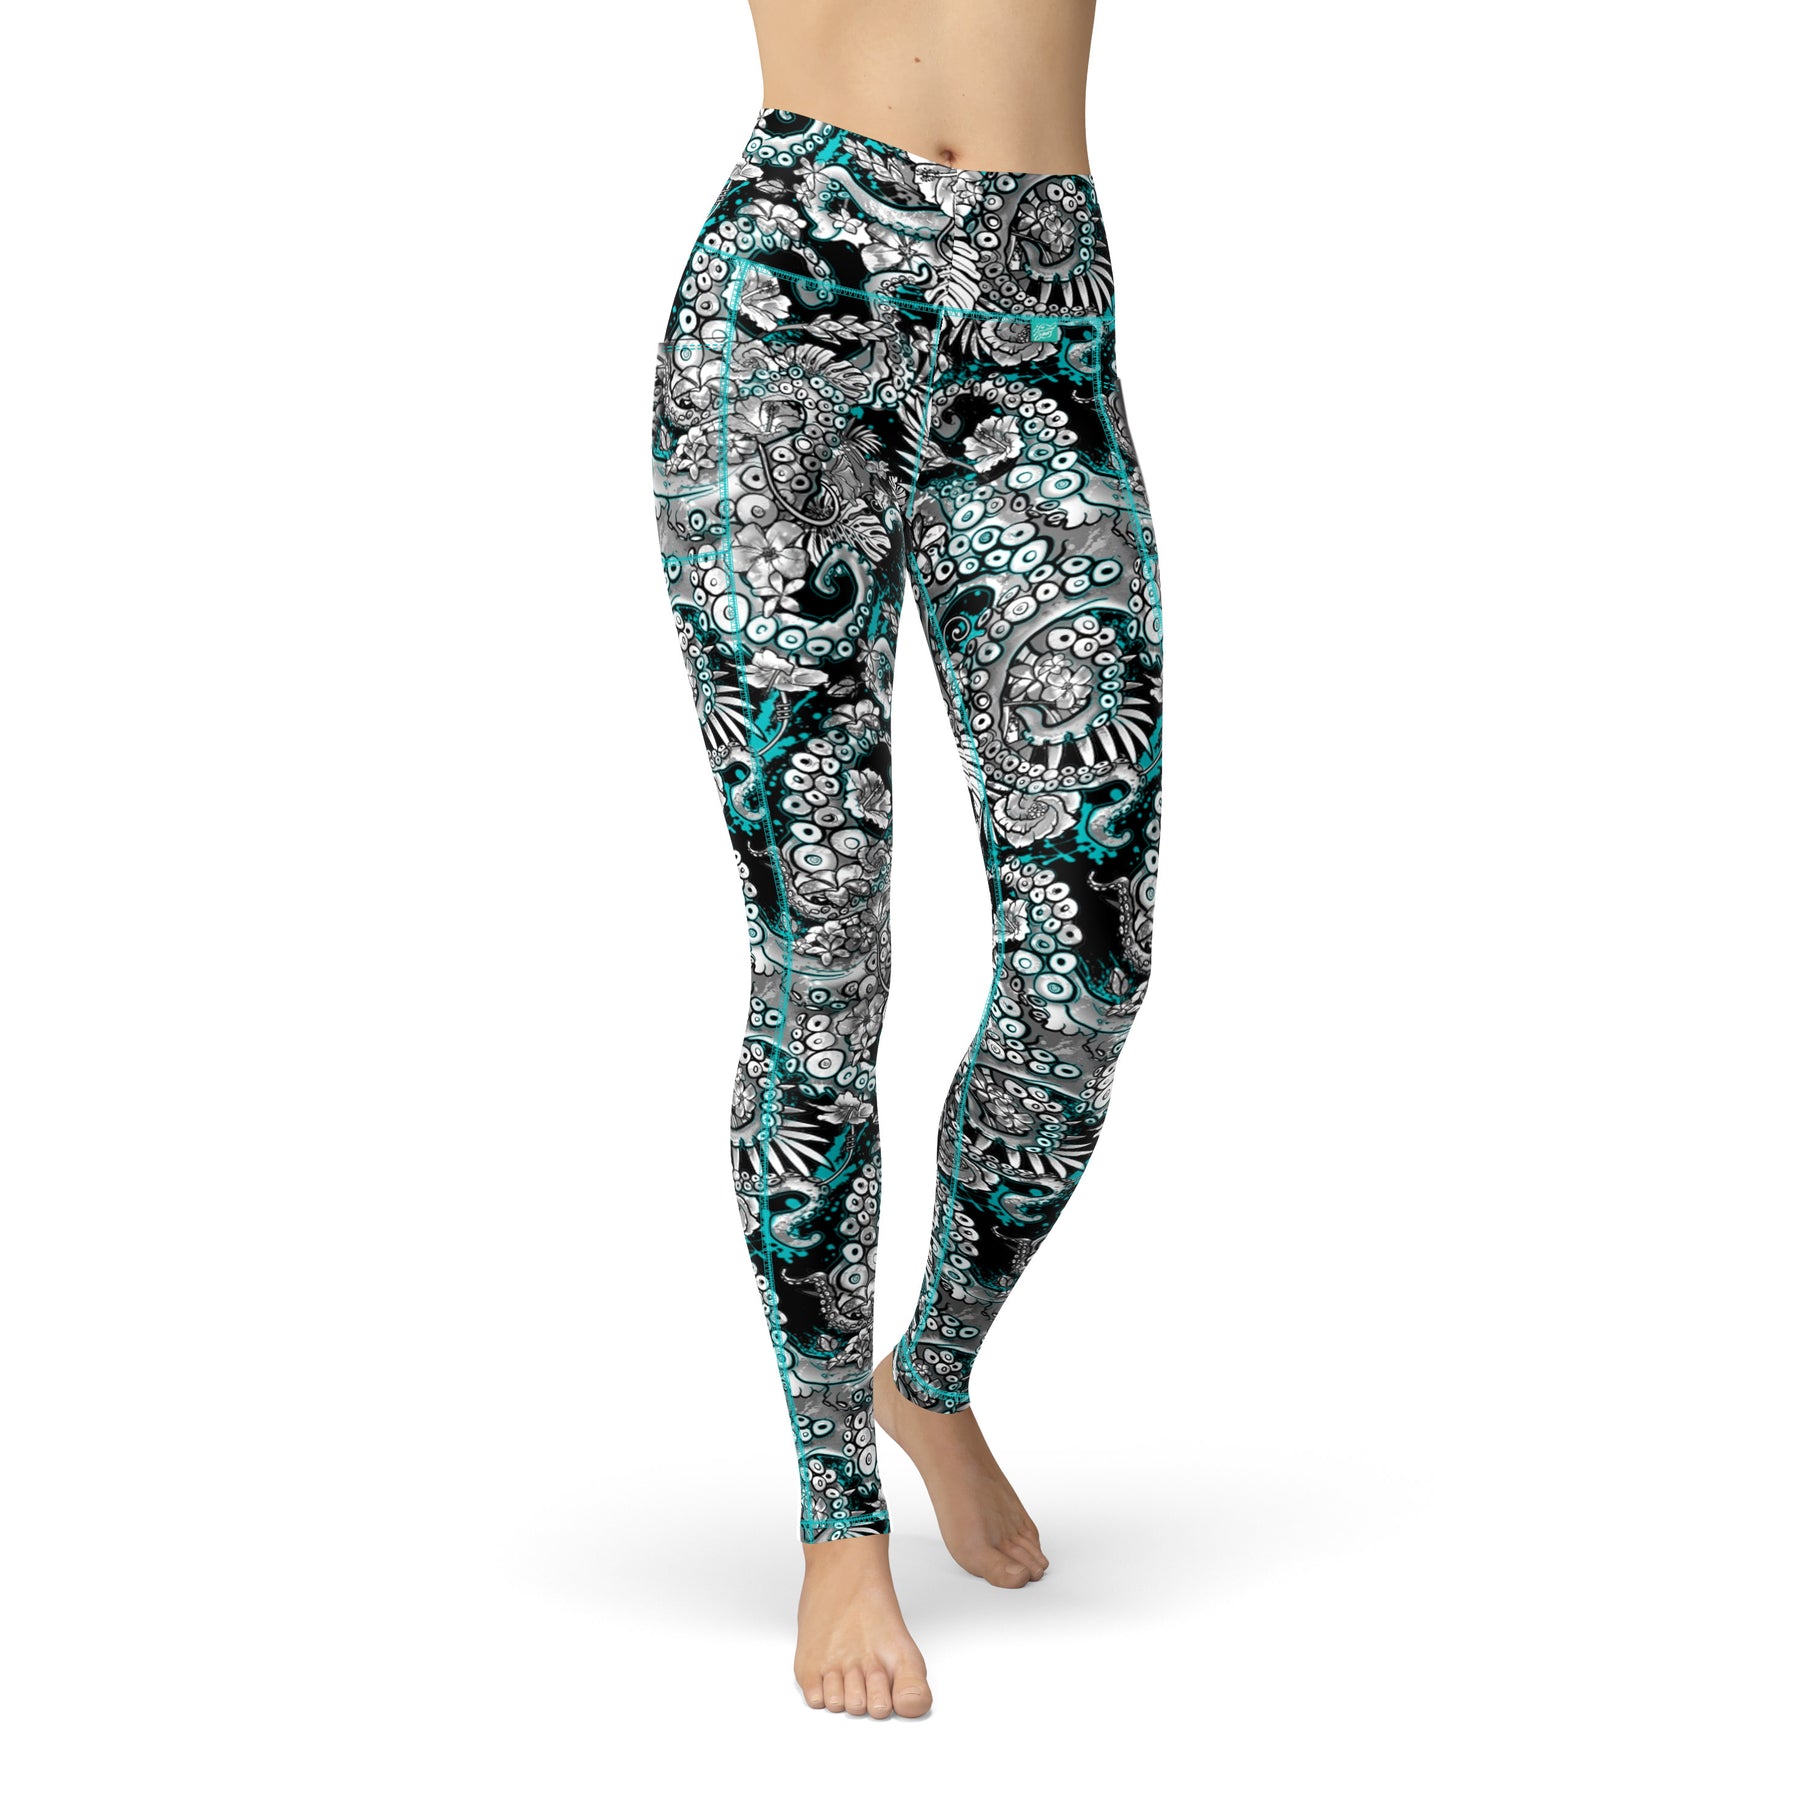 Electric Blue Octopus Leggings – Spacefish Army